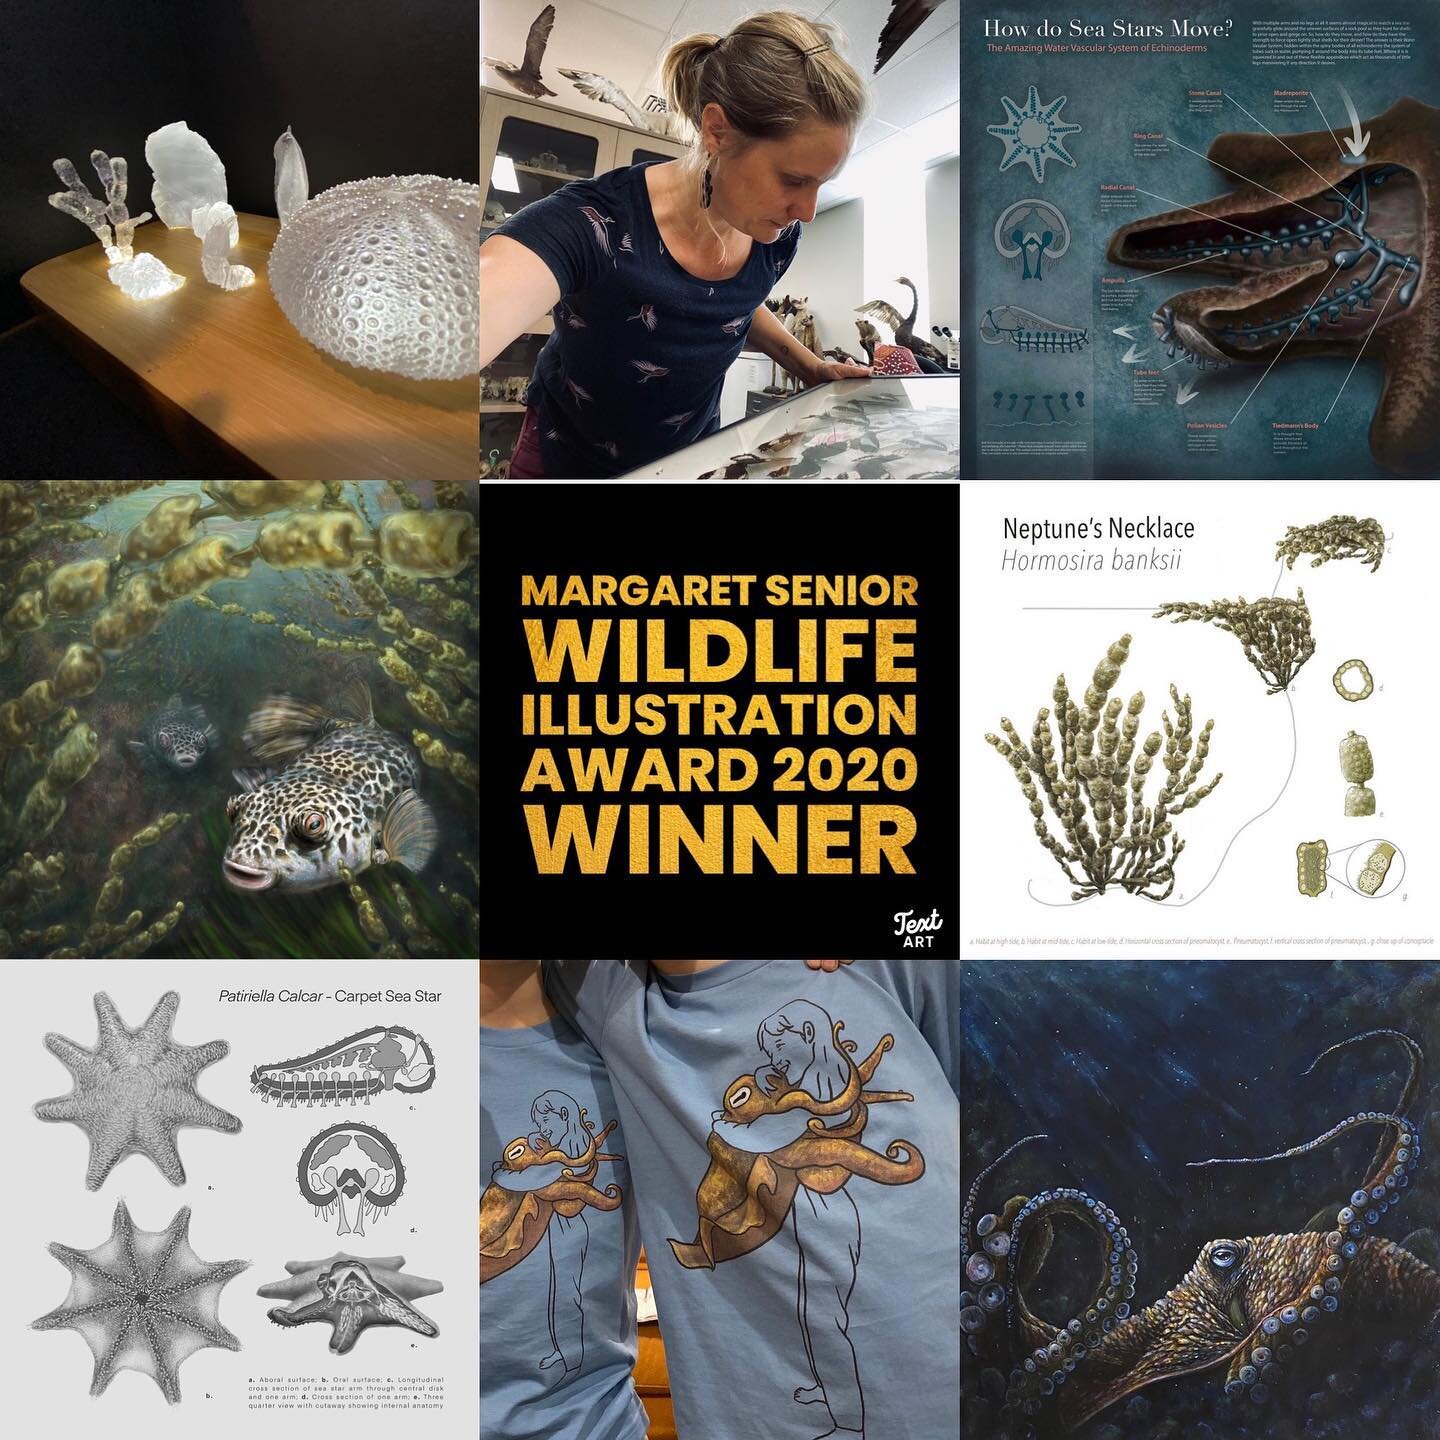 It&rsquo;s an honour to announce that I have won the 2020 Margaret Senior Wildlife illustration Prize from the University of Newcastle for my portfolio of works on the ecology of rock pools in SE Australia. 

Margaret Senior OAM (1917-1995) was one o